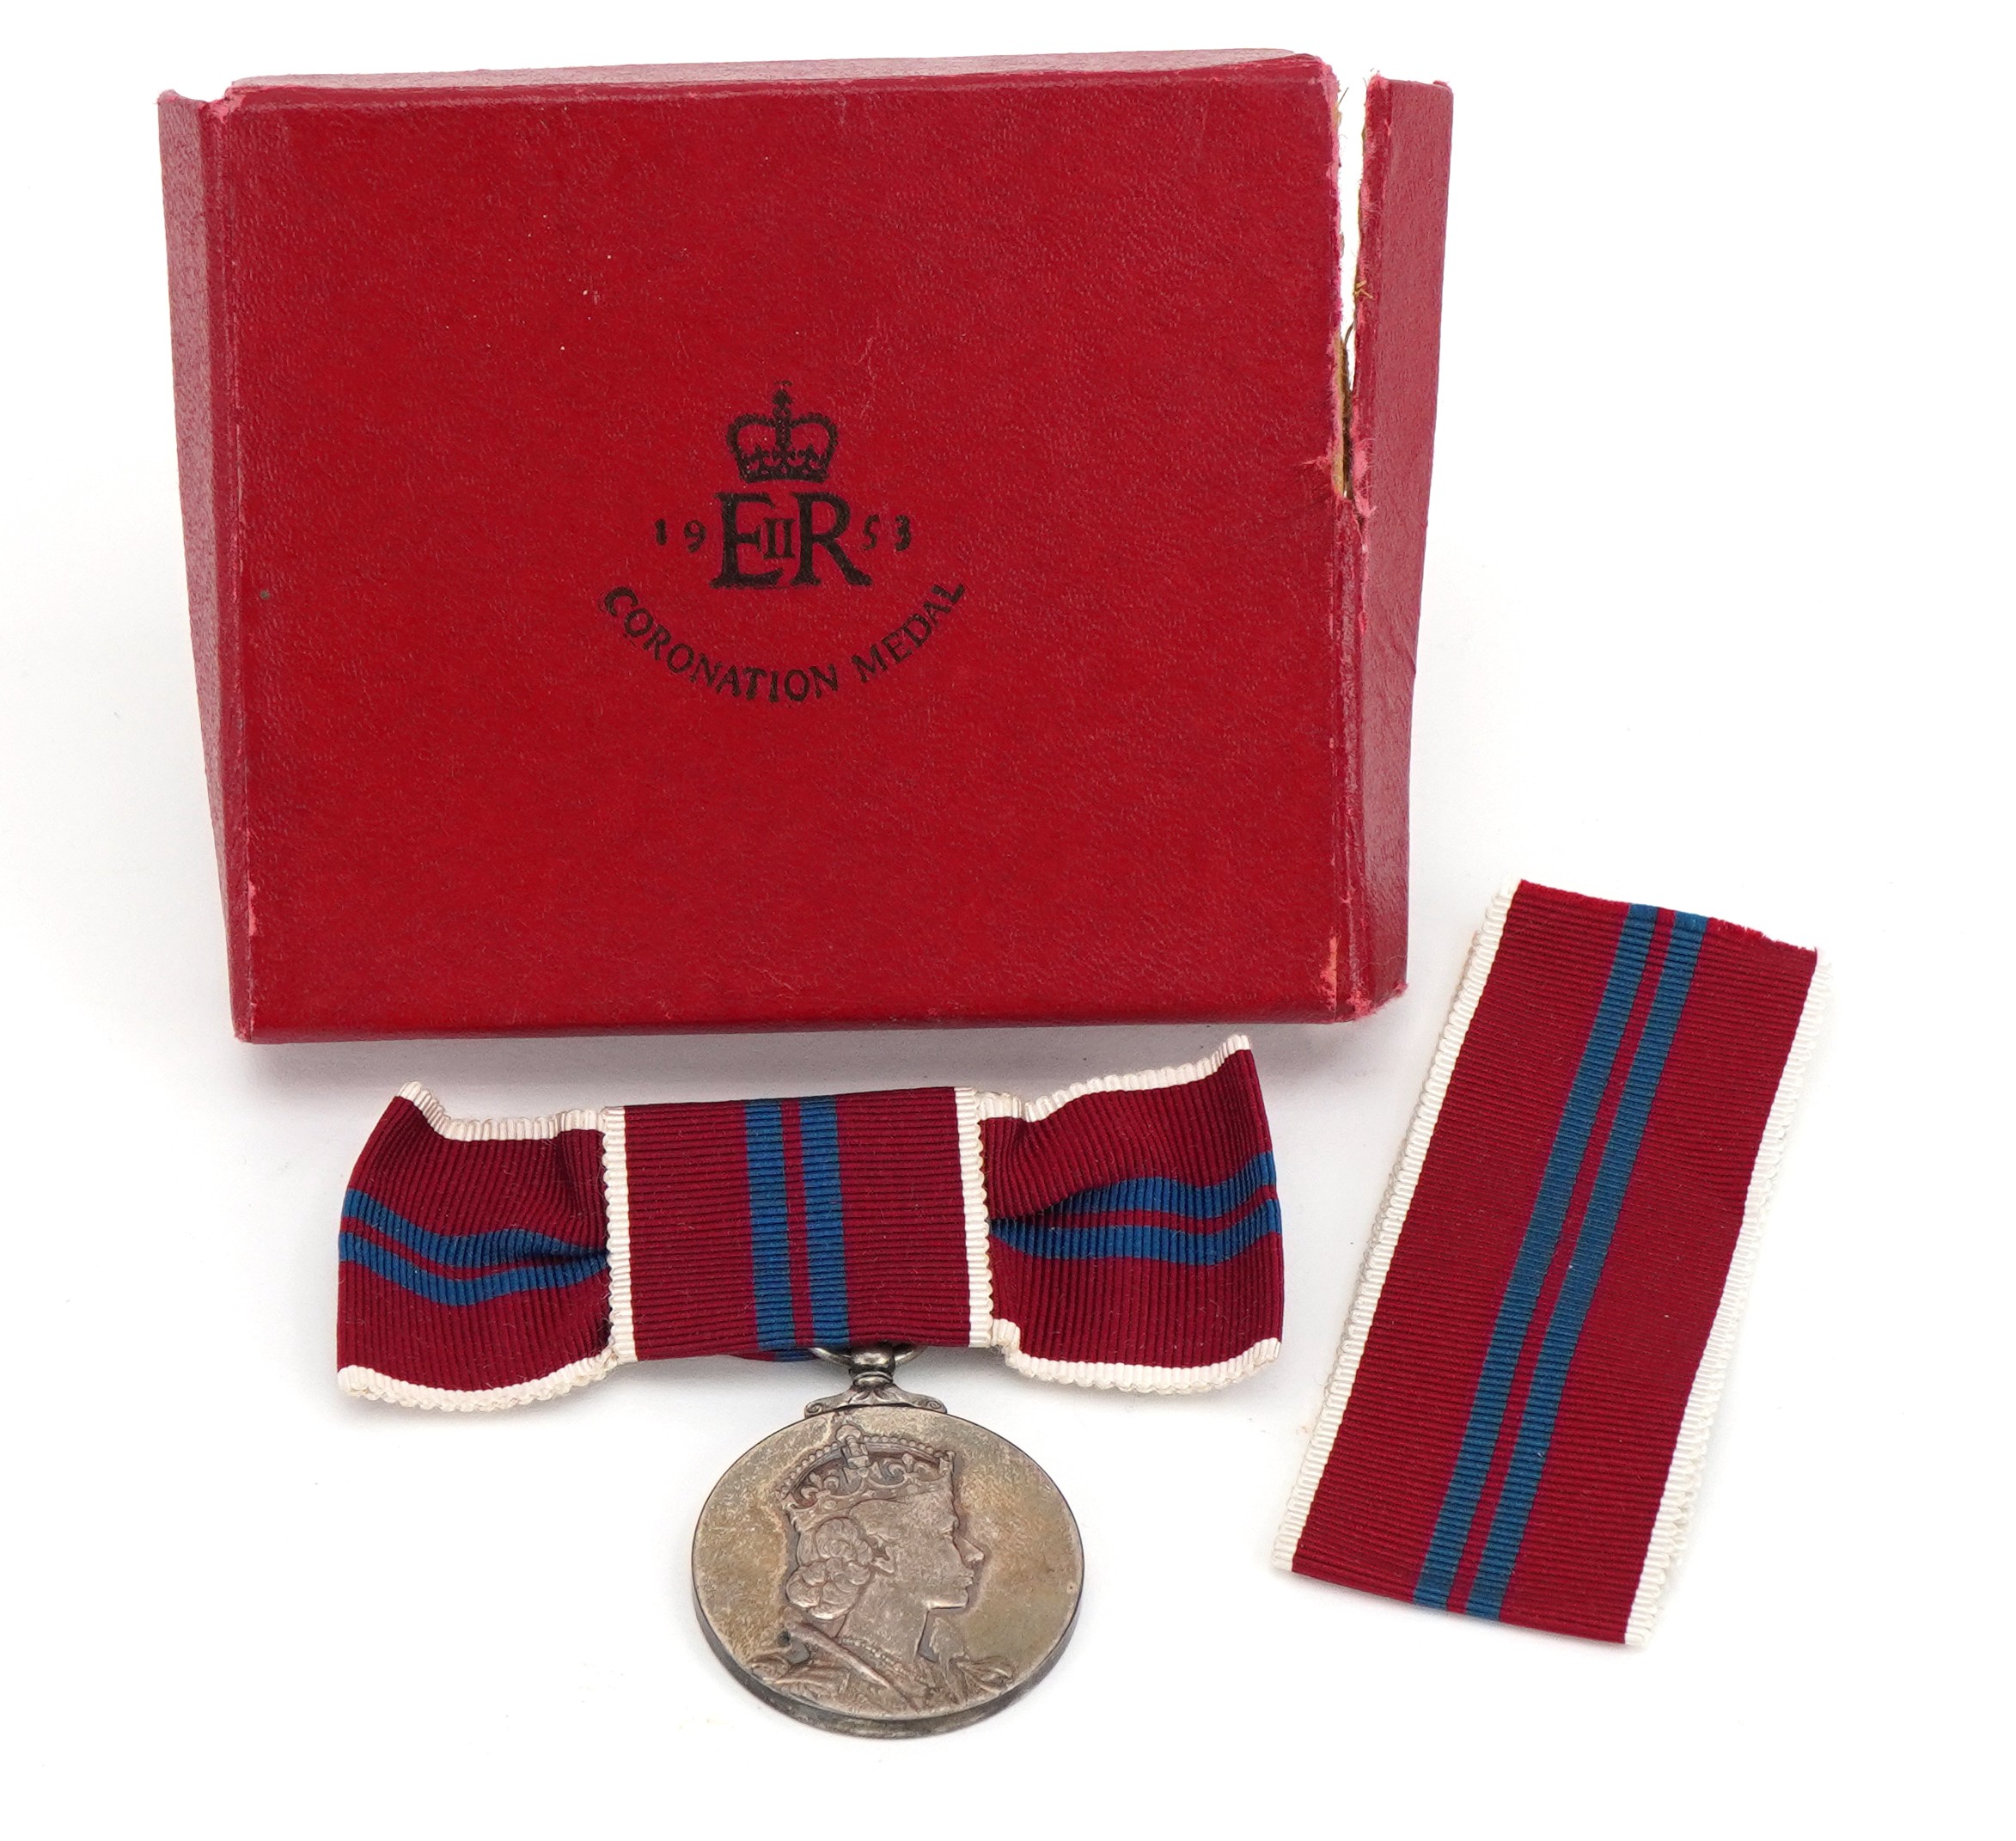 Elizabeth II 1953 ladies coronation medal with box : For further information on this lot please